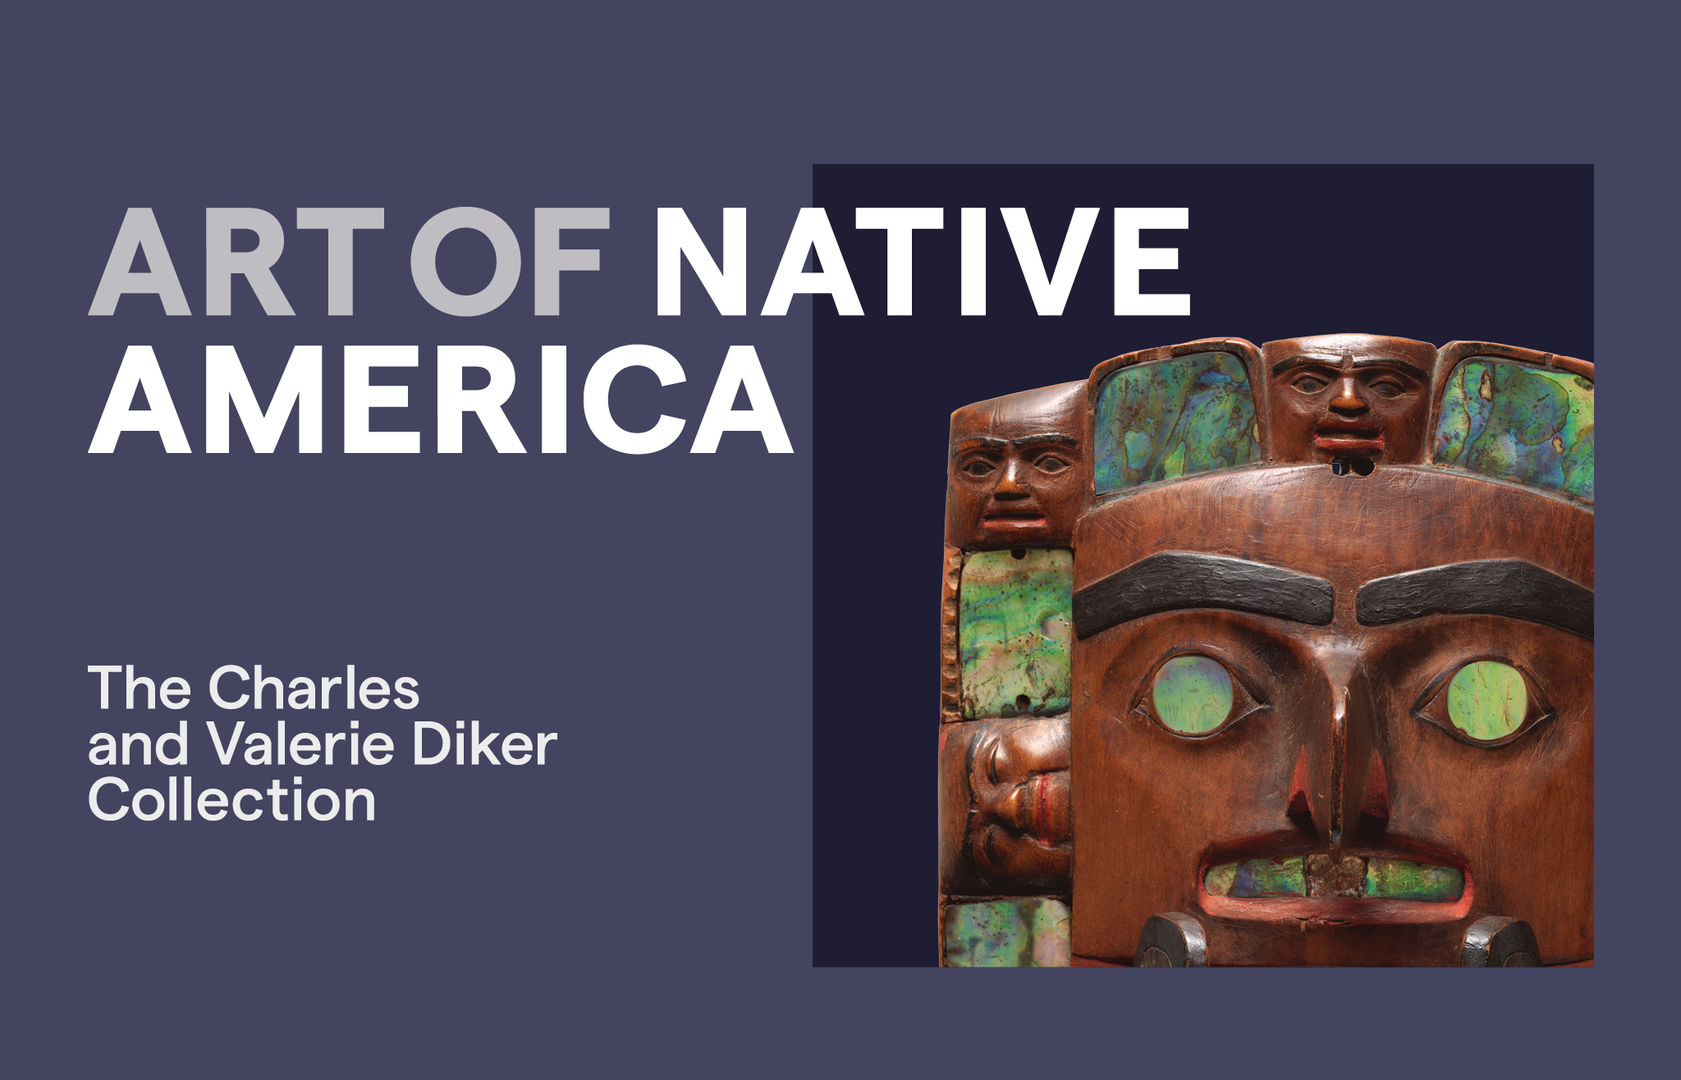 Art of Native America: The Charles and Valerie Diker Collection